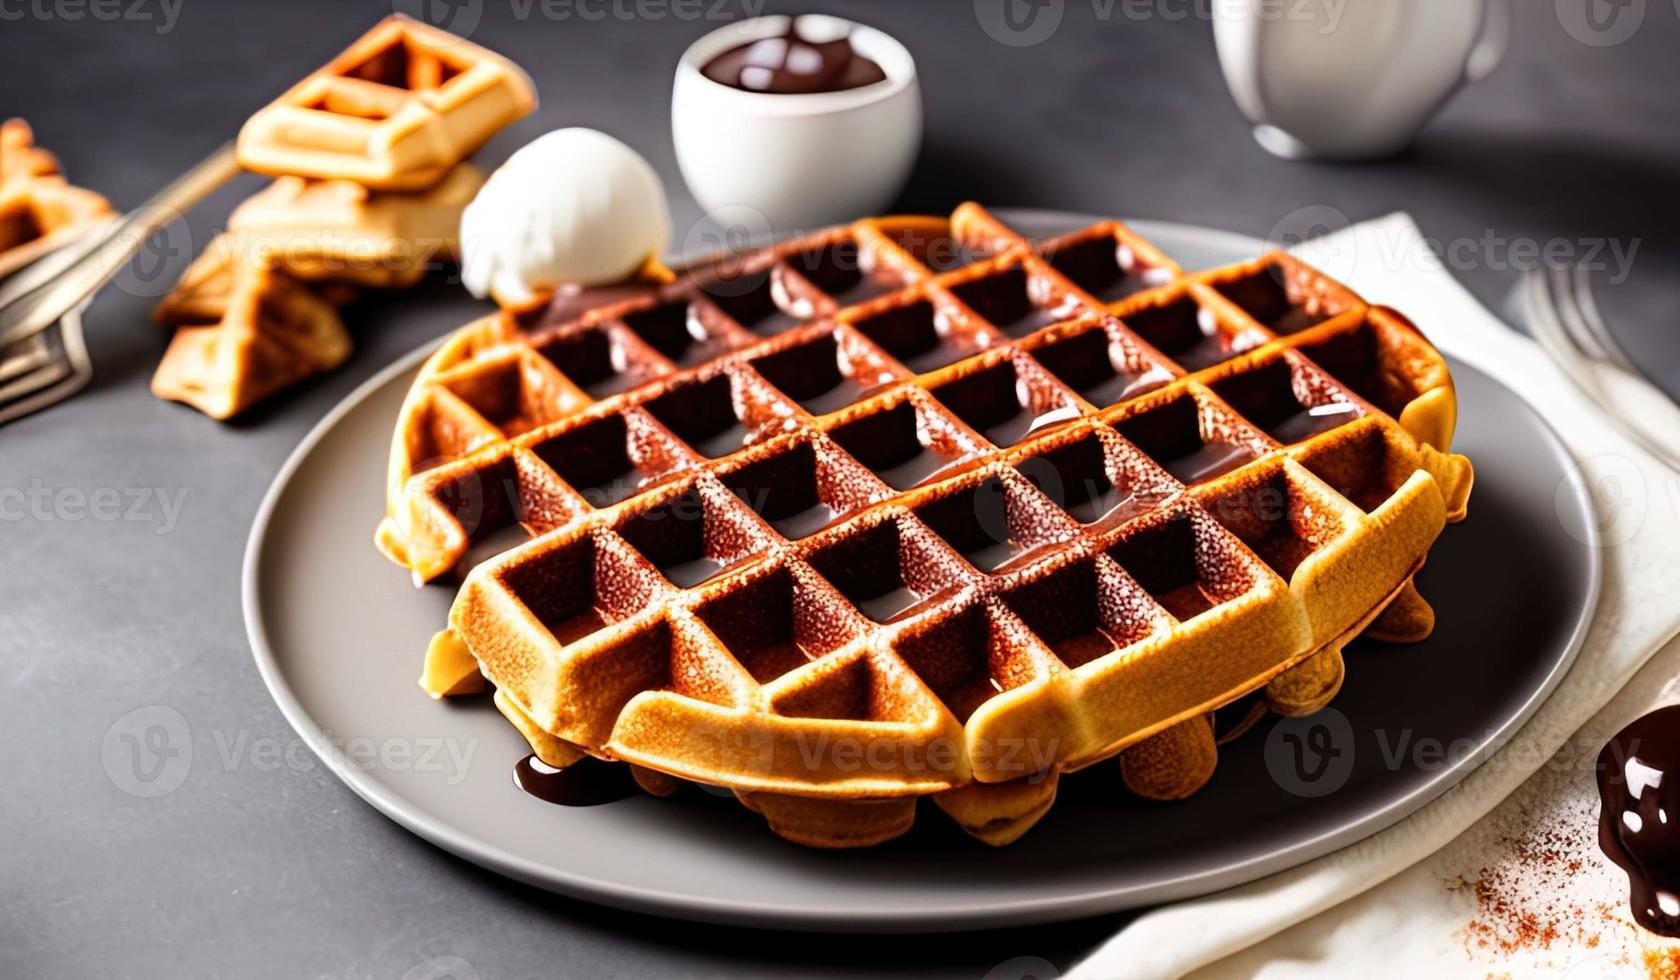 professional food photography close up of a Plate of Belgian waffles with chocolate sauce and ice cream on a dark gray background photo